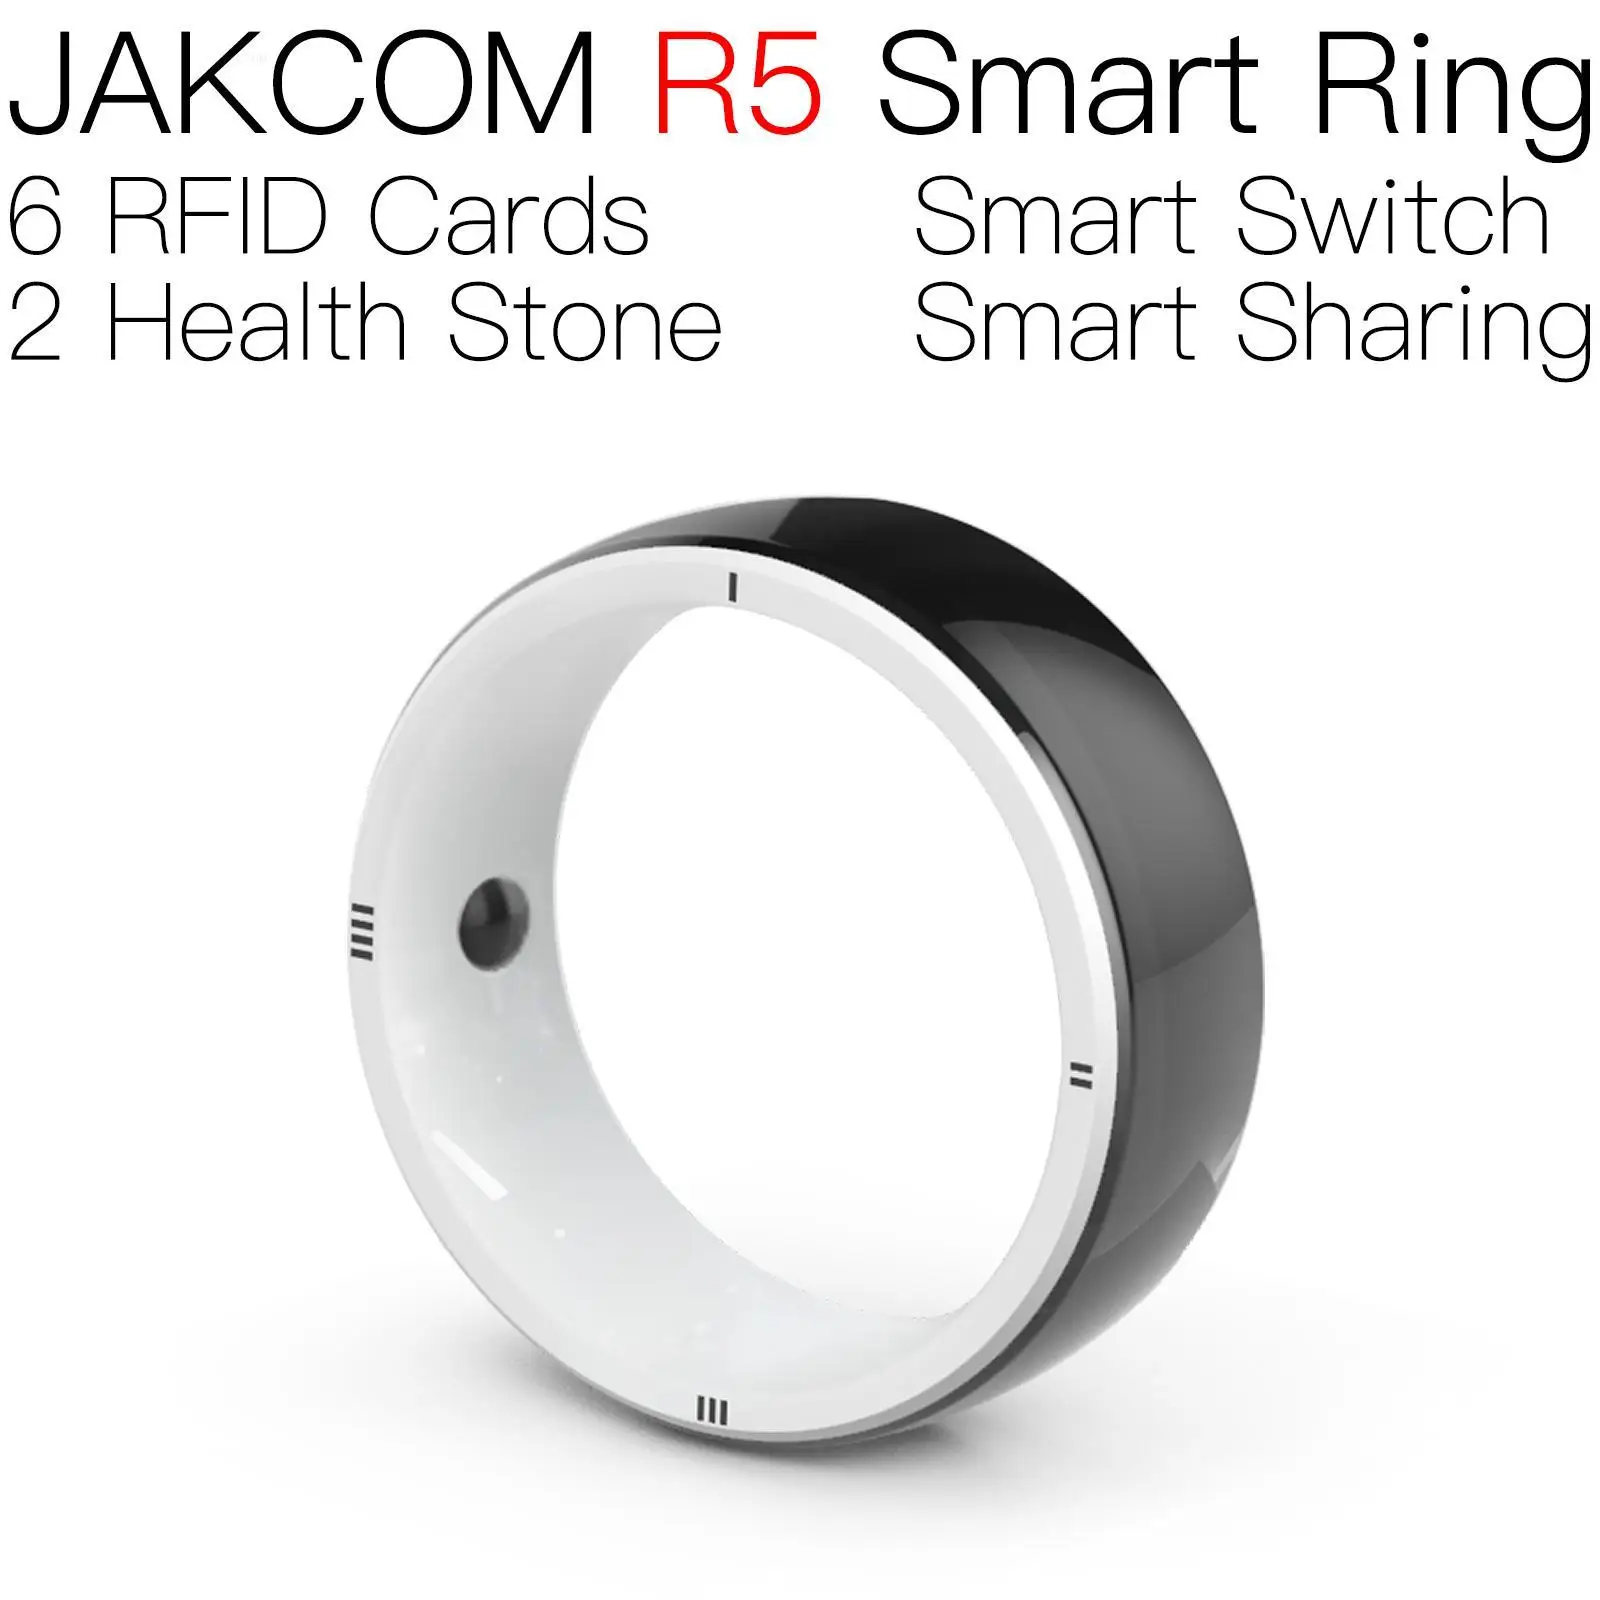 

JAKCOM R5 Smart Ring Super value as tag nfc pigeon communications jammer blocker the cao smart new id card reader anel rfid